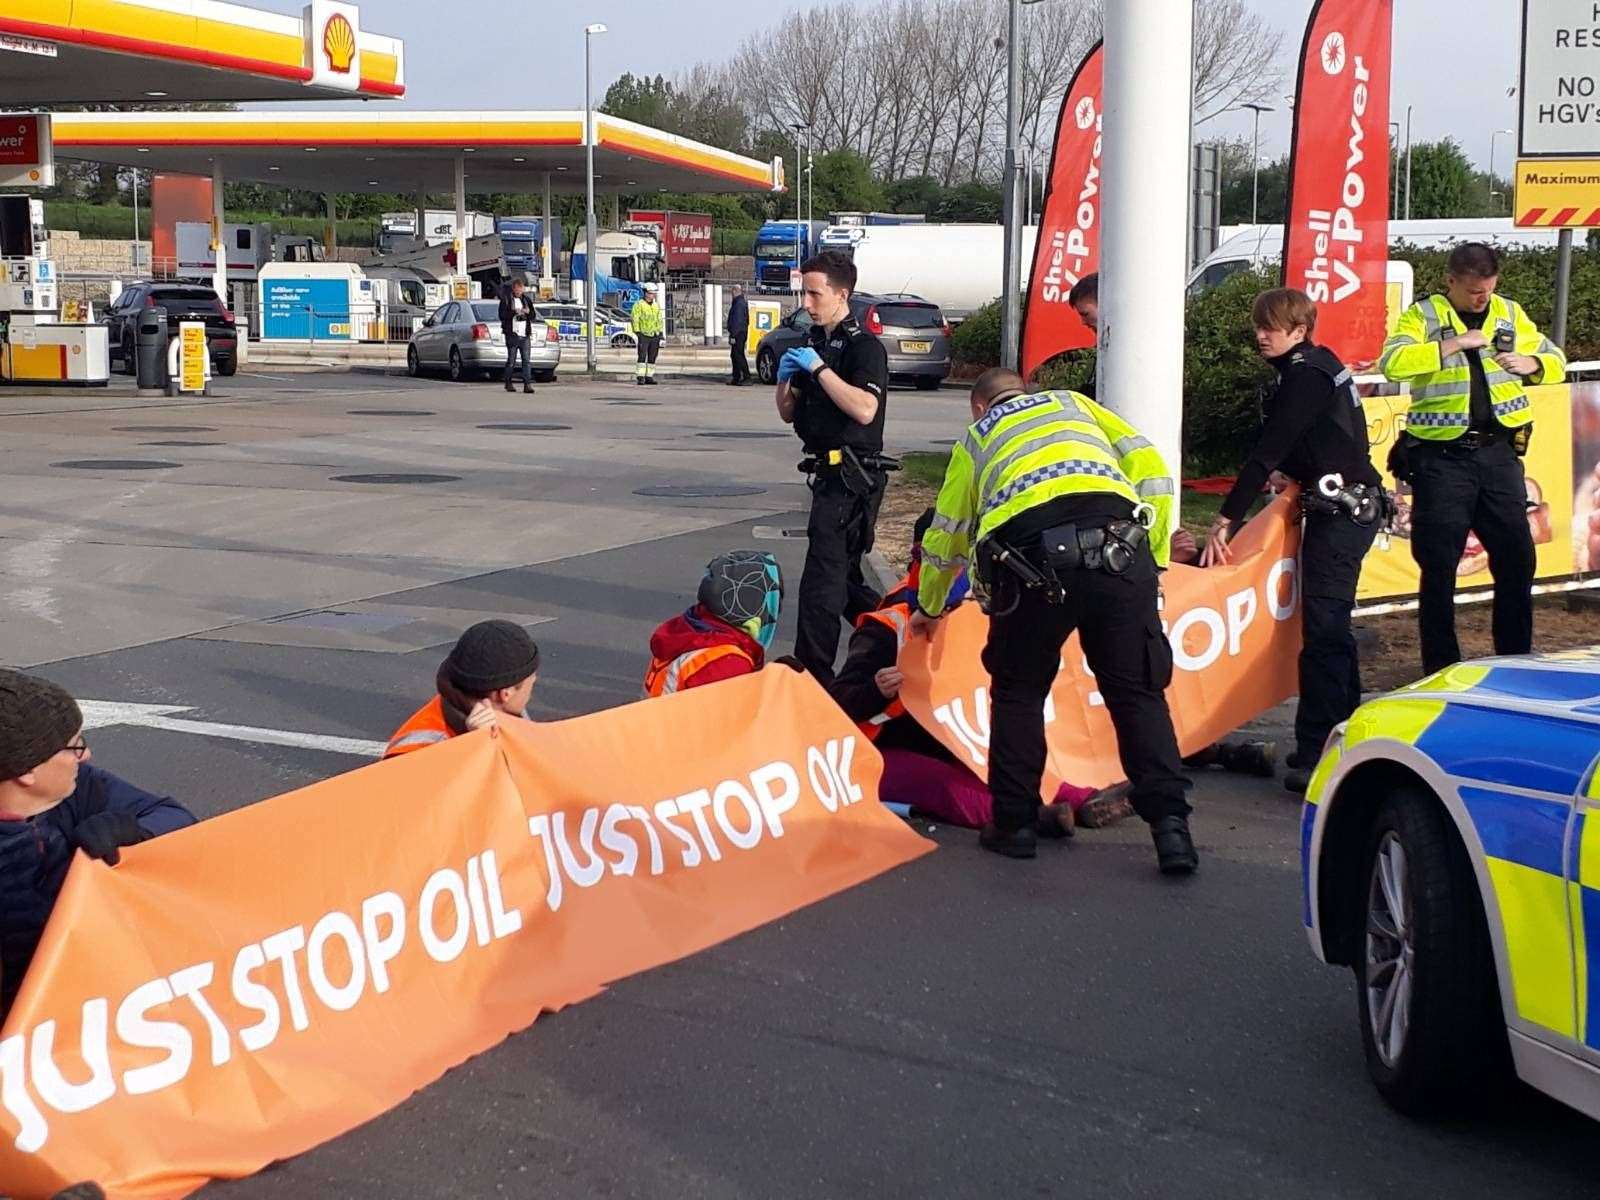 Campaigners staging a protest in the Shell petrol garage at Cobham Services on the M25 in Surrey (Just Stop Oil/PA)